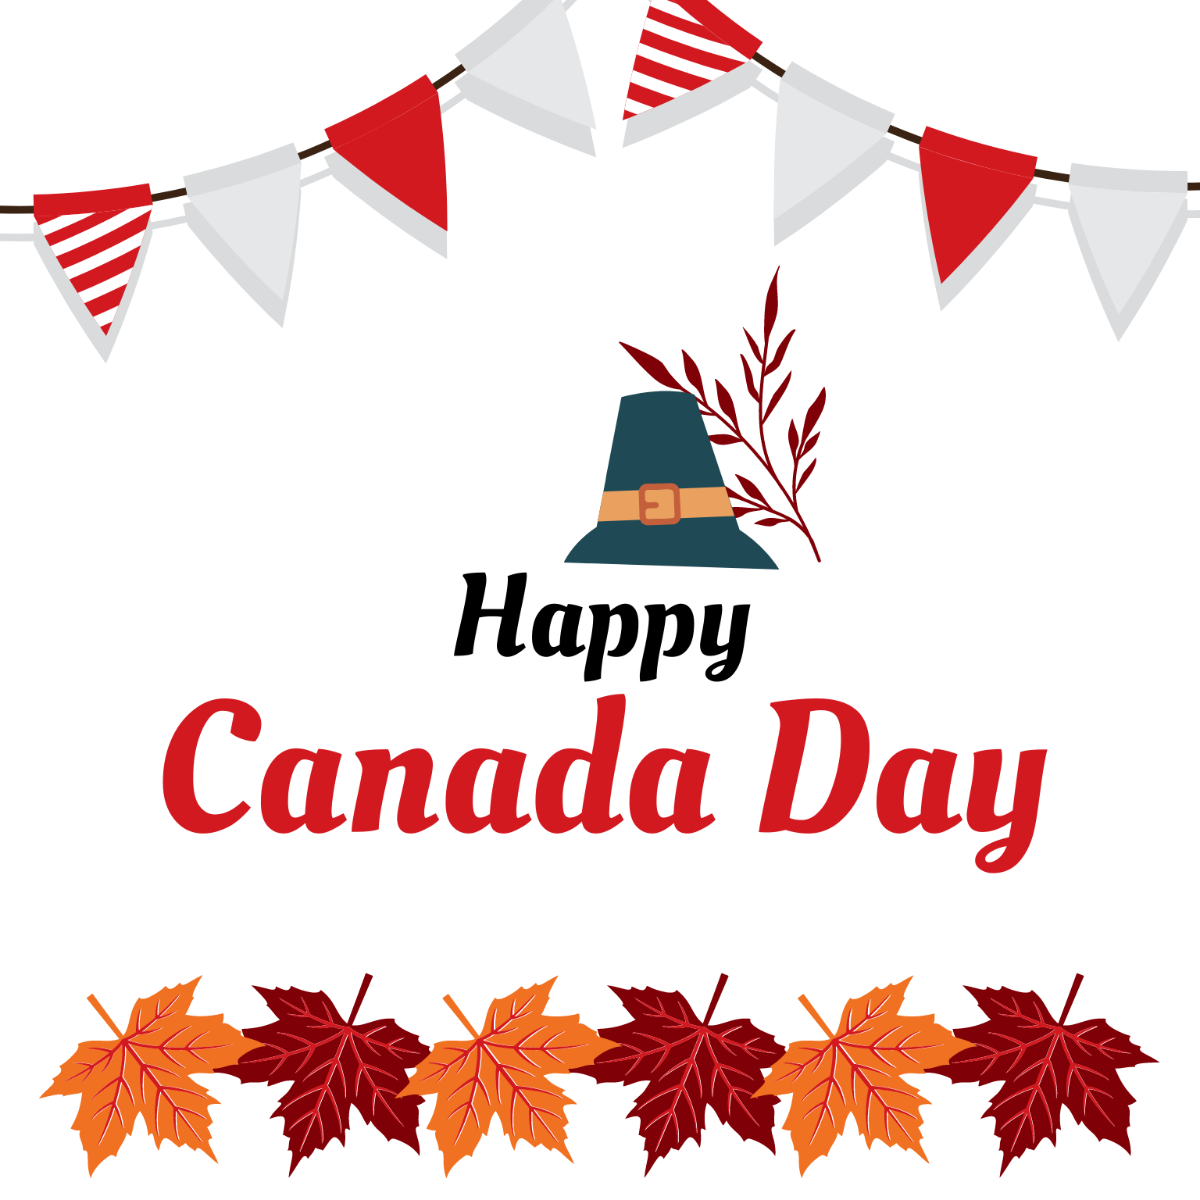 Free Happy Canada Day Illustration Template